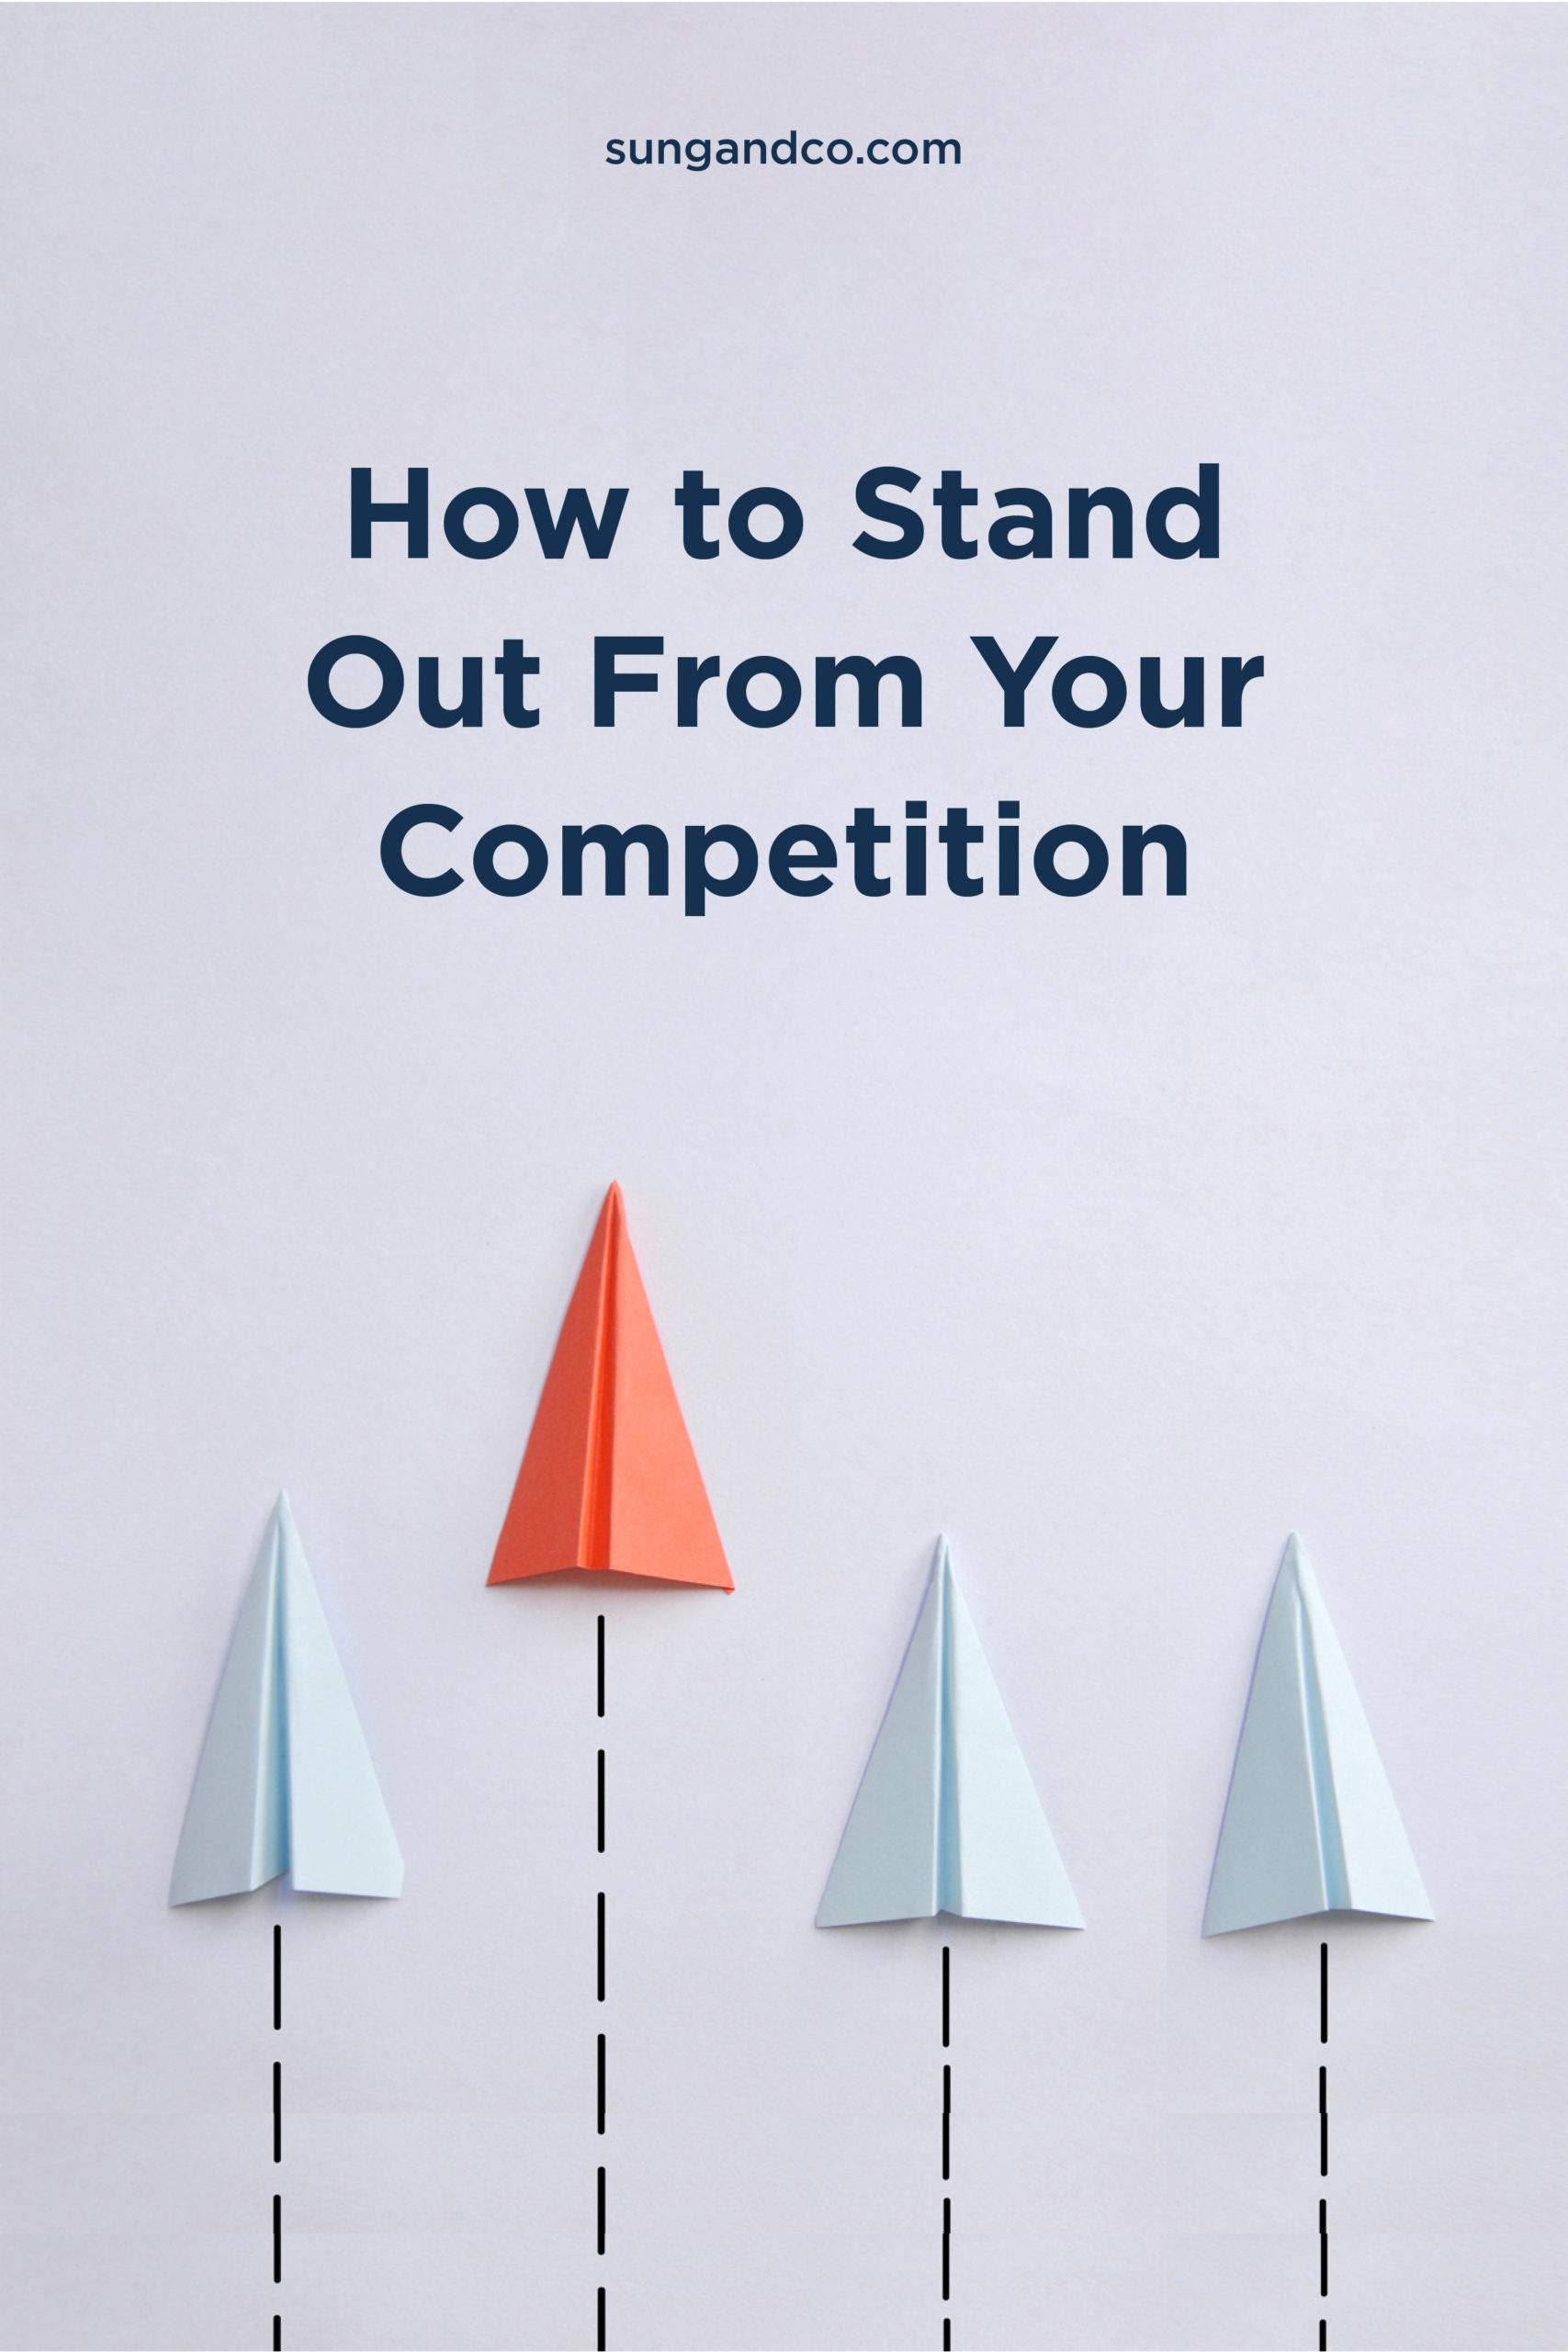 Learn how to stand out from your competition.